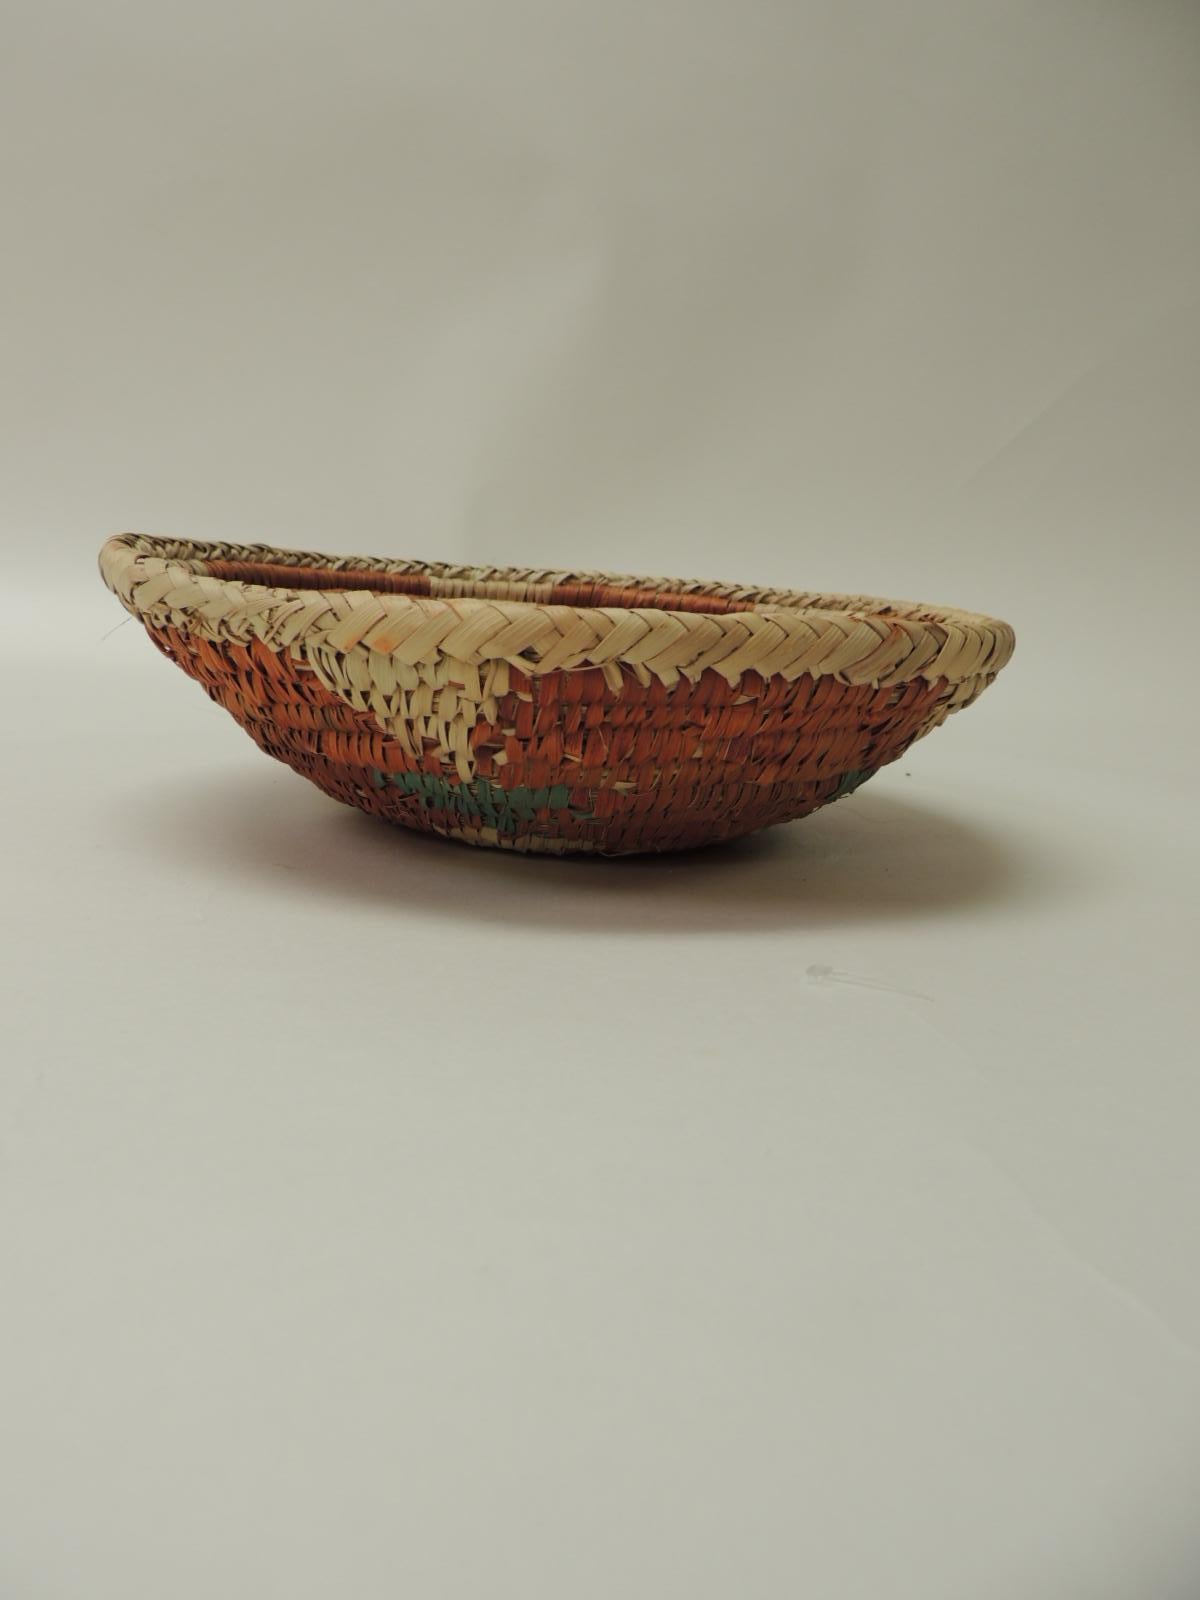 American Small Orange and Green Round Tribal Decorative Basket or Bowl